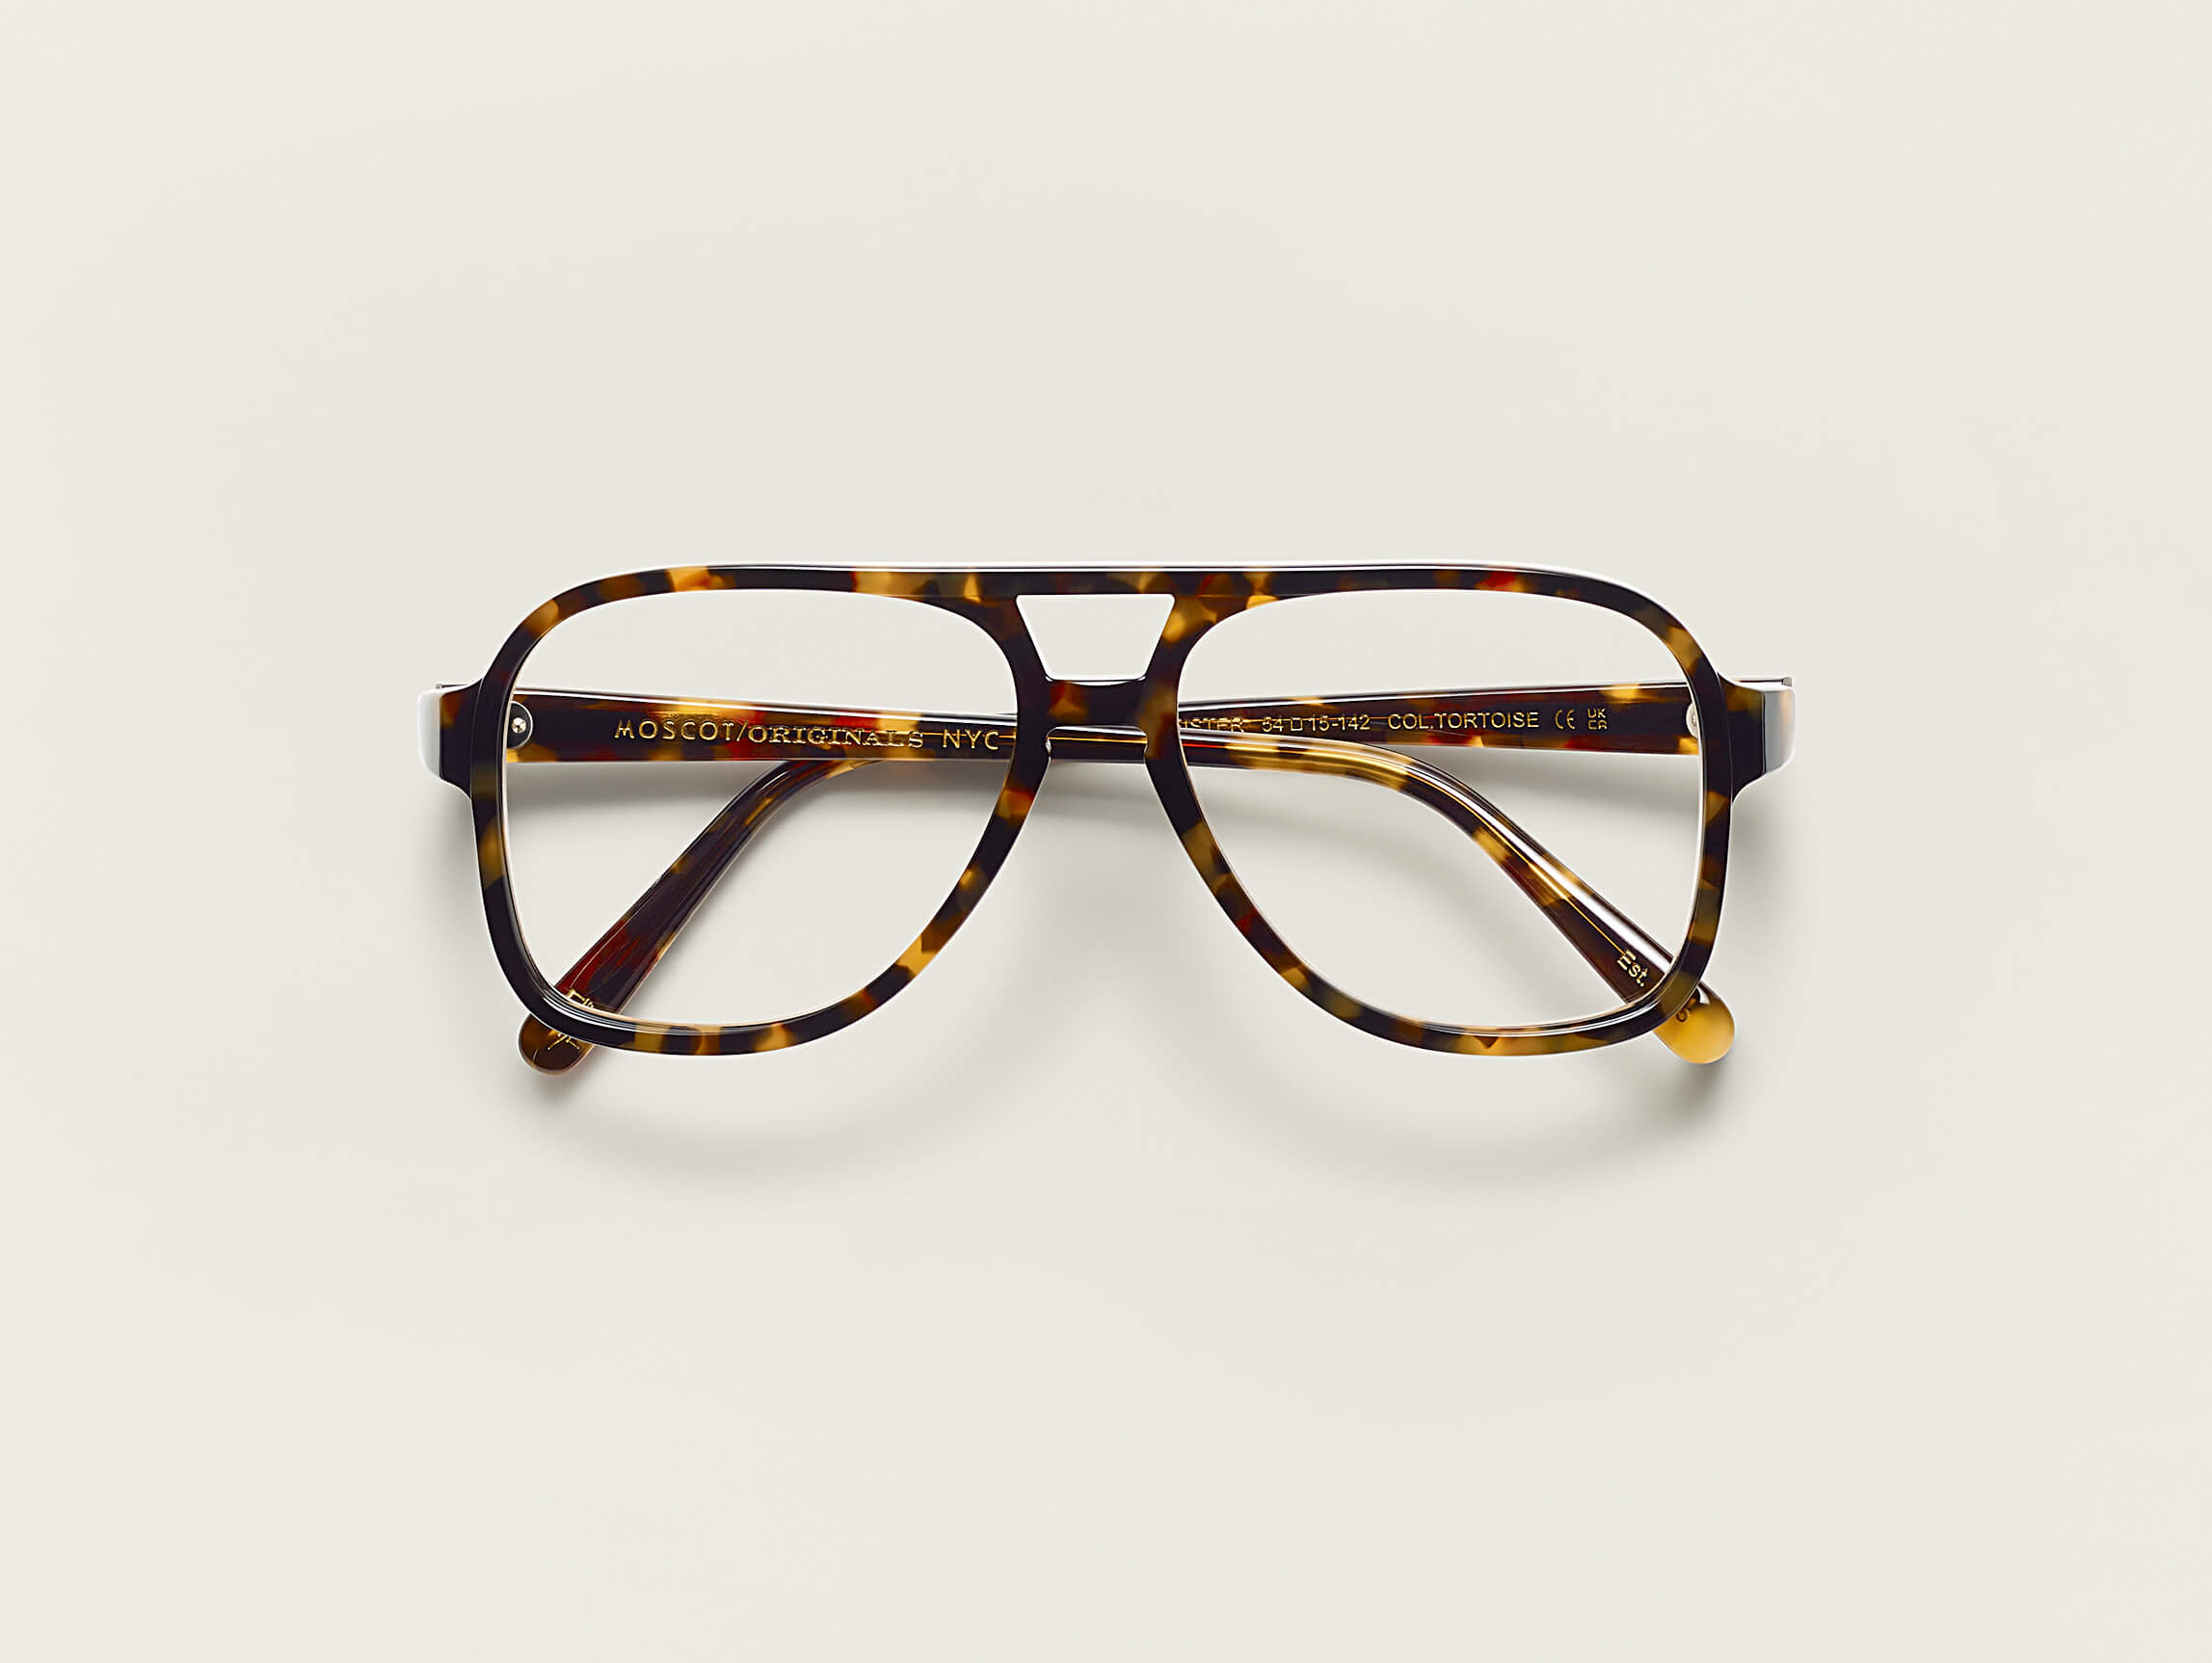 #color_tortoise | The SHEISTER in Tortoise